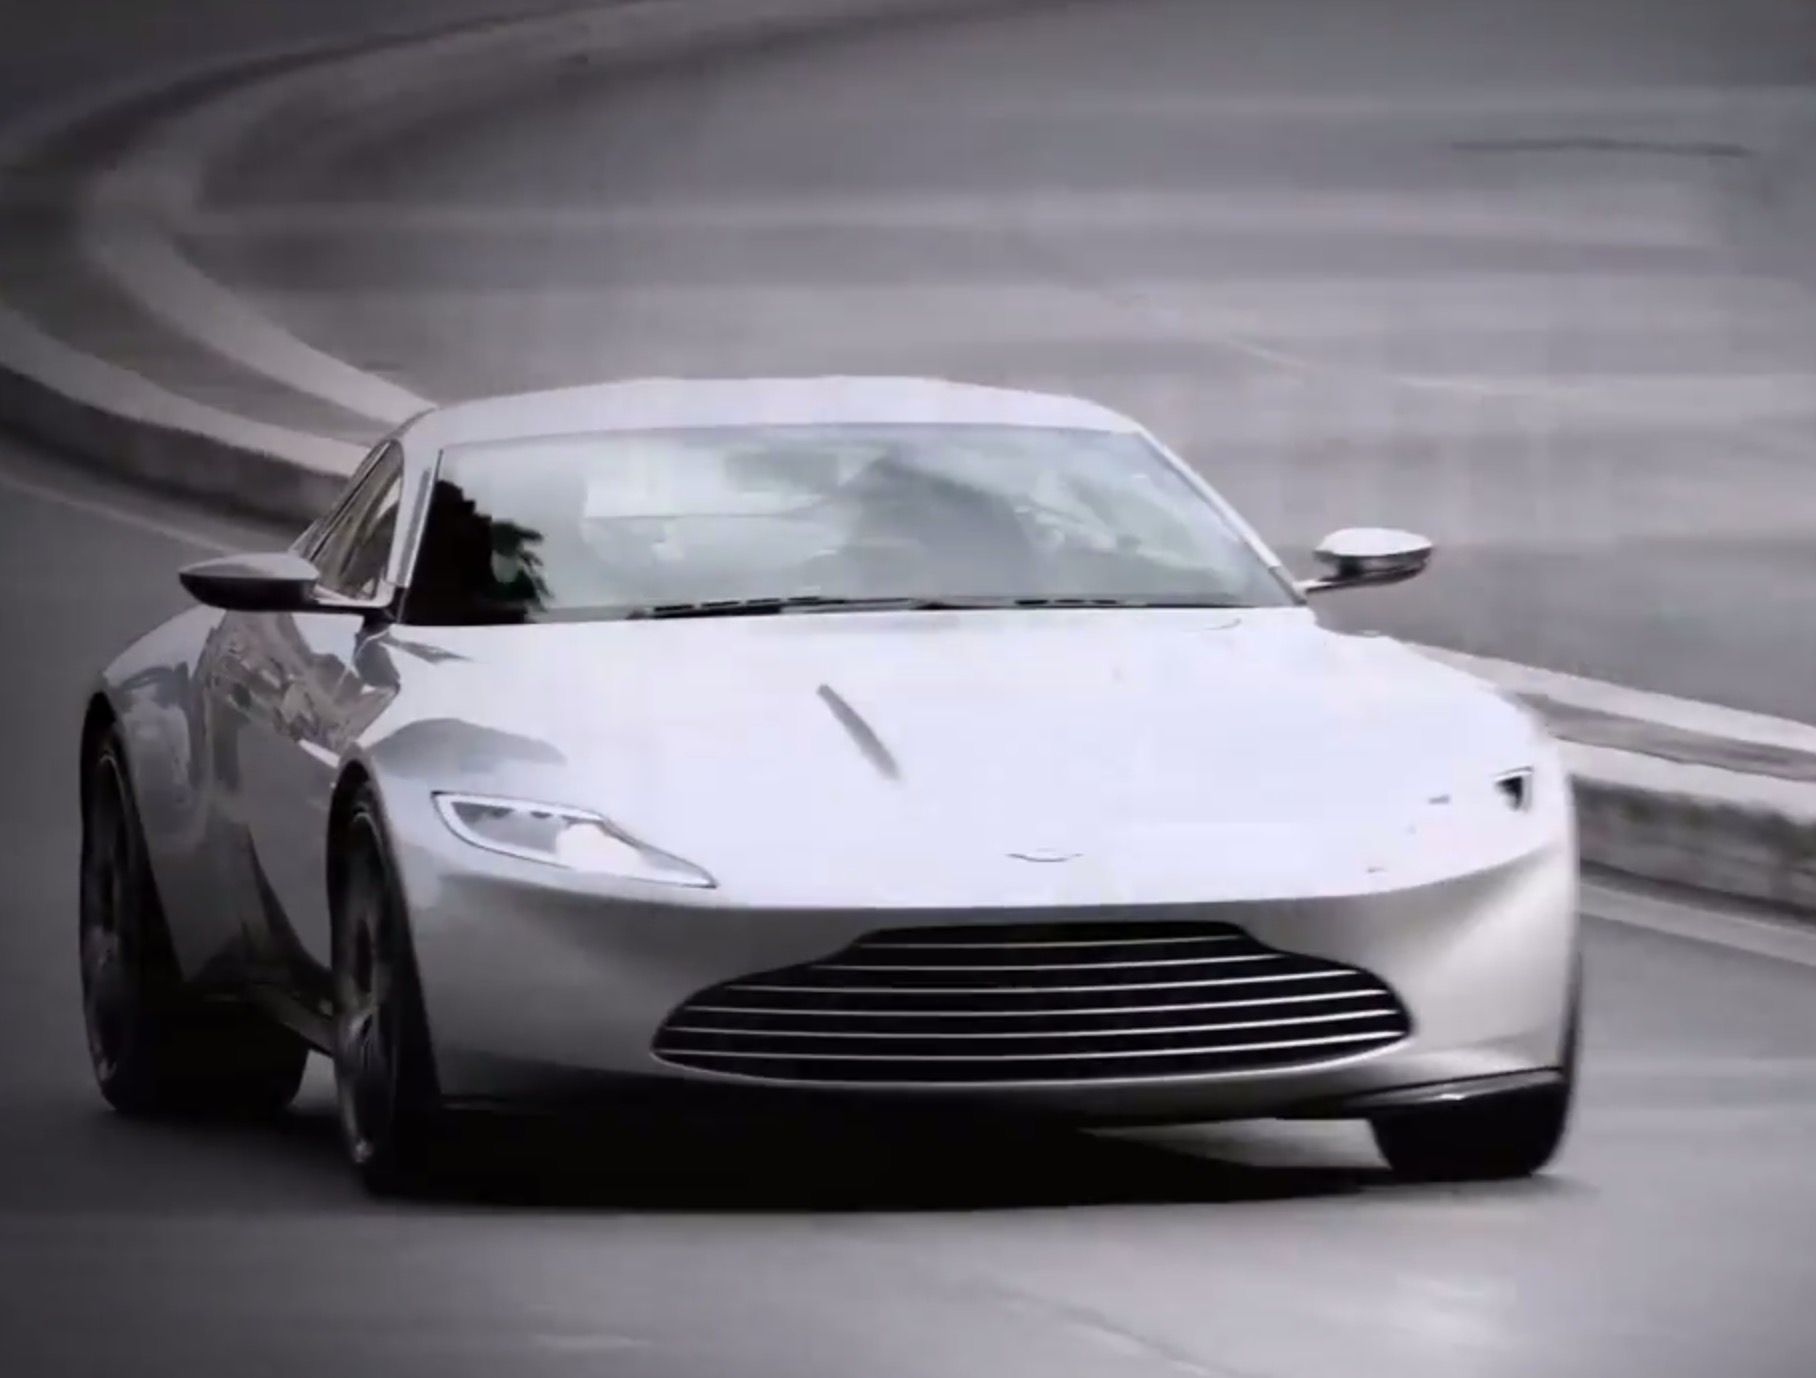 spectre set footage shows off james bond’s new aston martin db1 in a car chase image 1